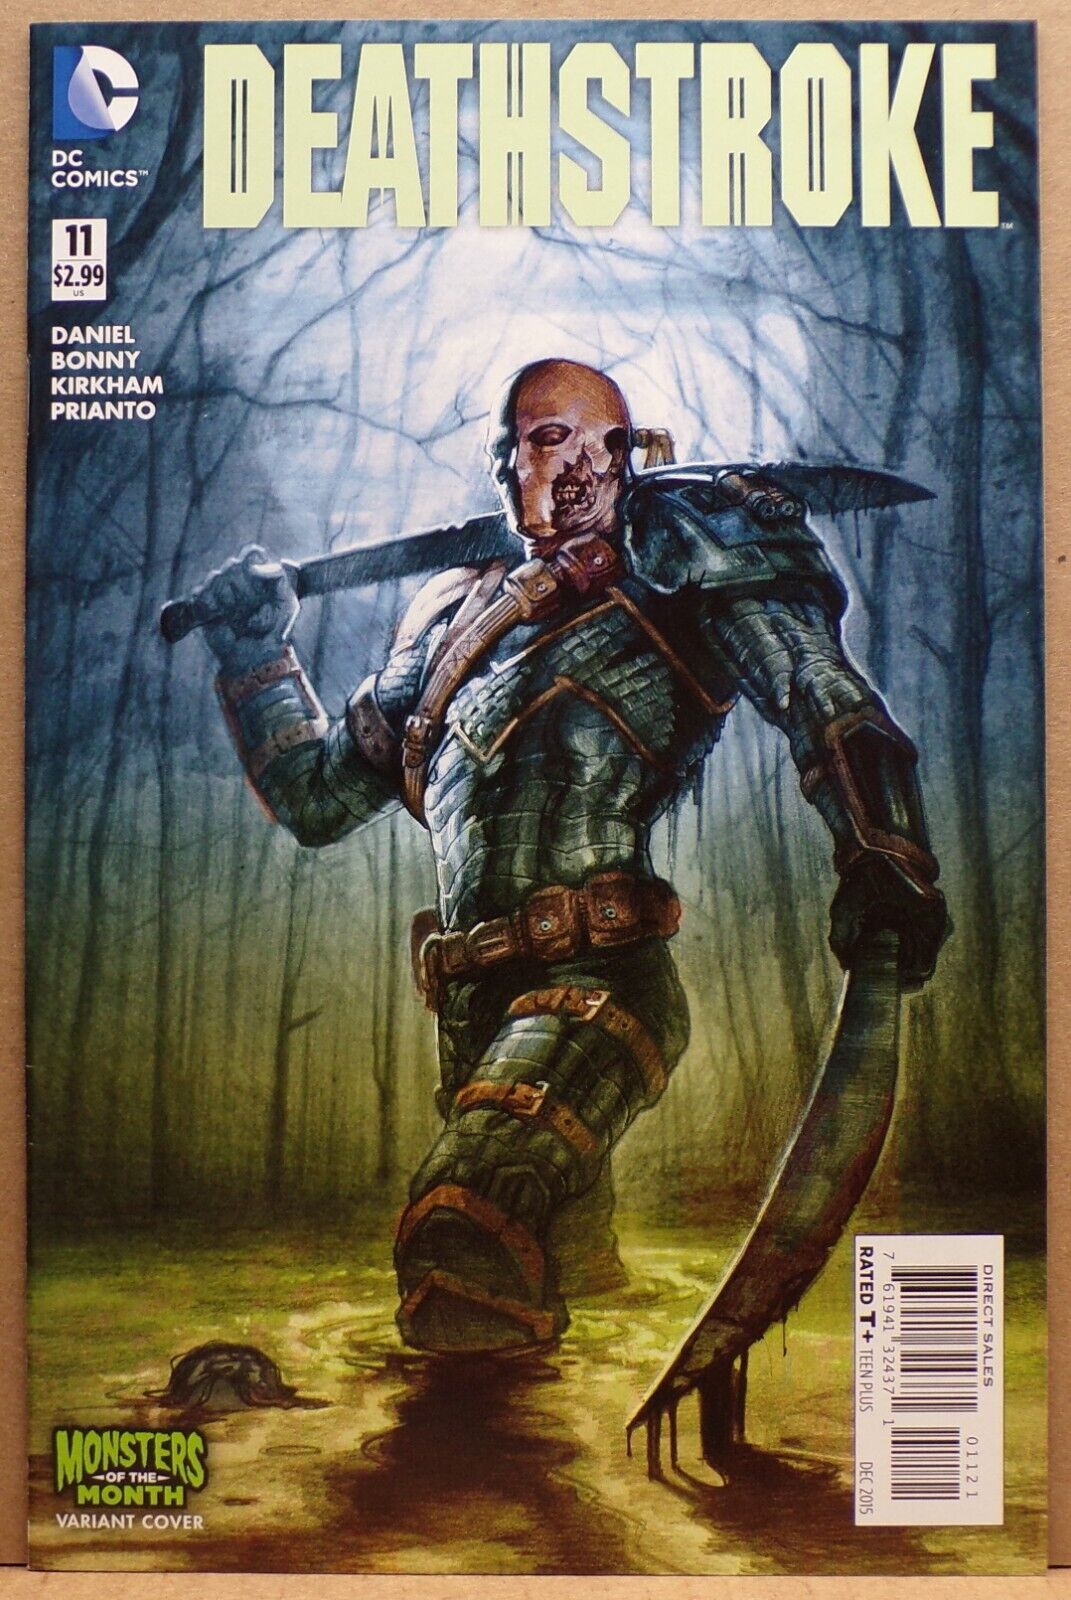 Deathstroke Inc. #11 -Monsters of the Month Cover (Em Gist)--2015--